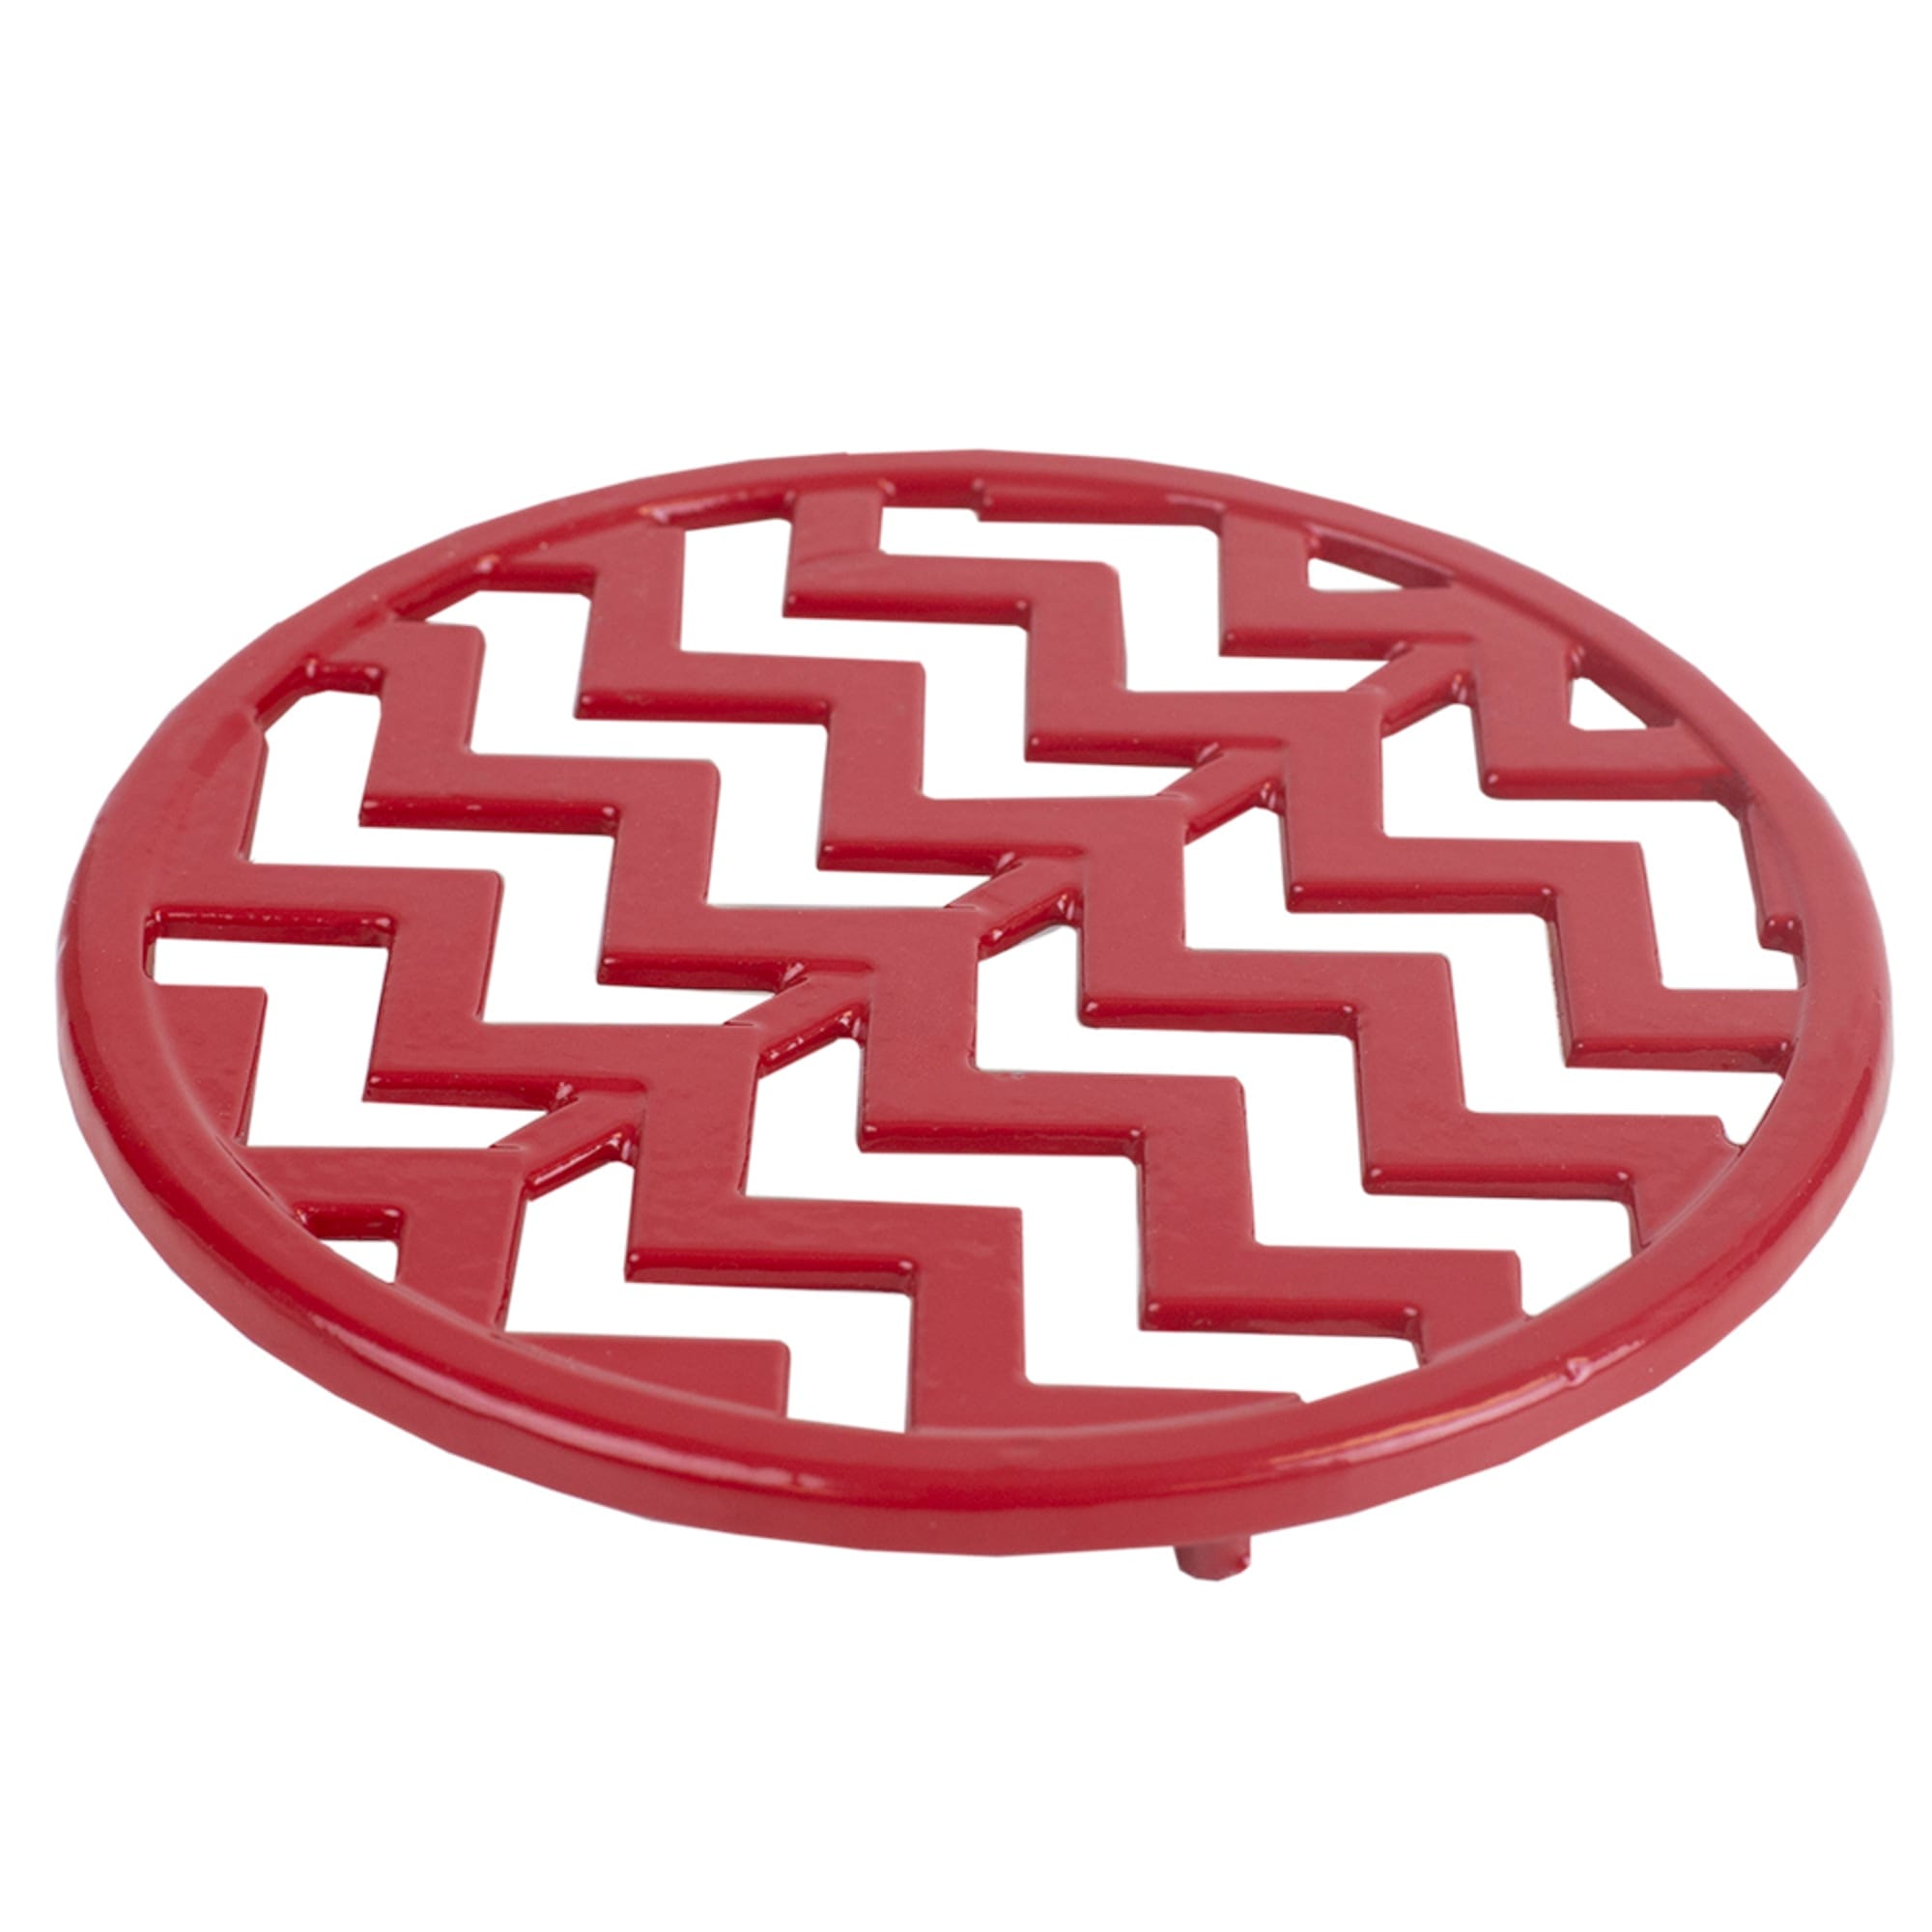 Home Basics Chevron Collection Cast Iron Trivet, Red $6.00 EACH, CASE PACK OF 6